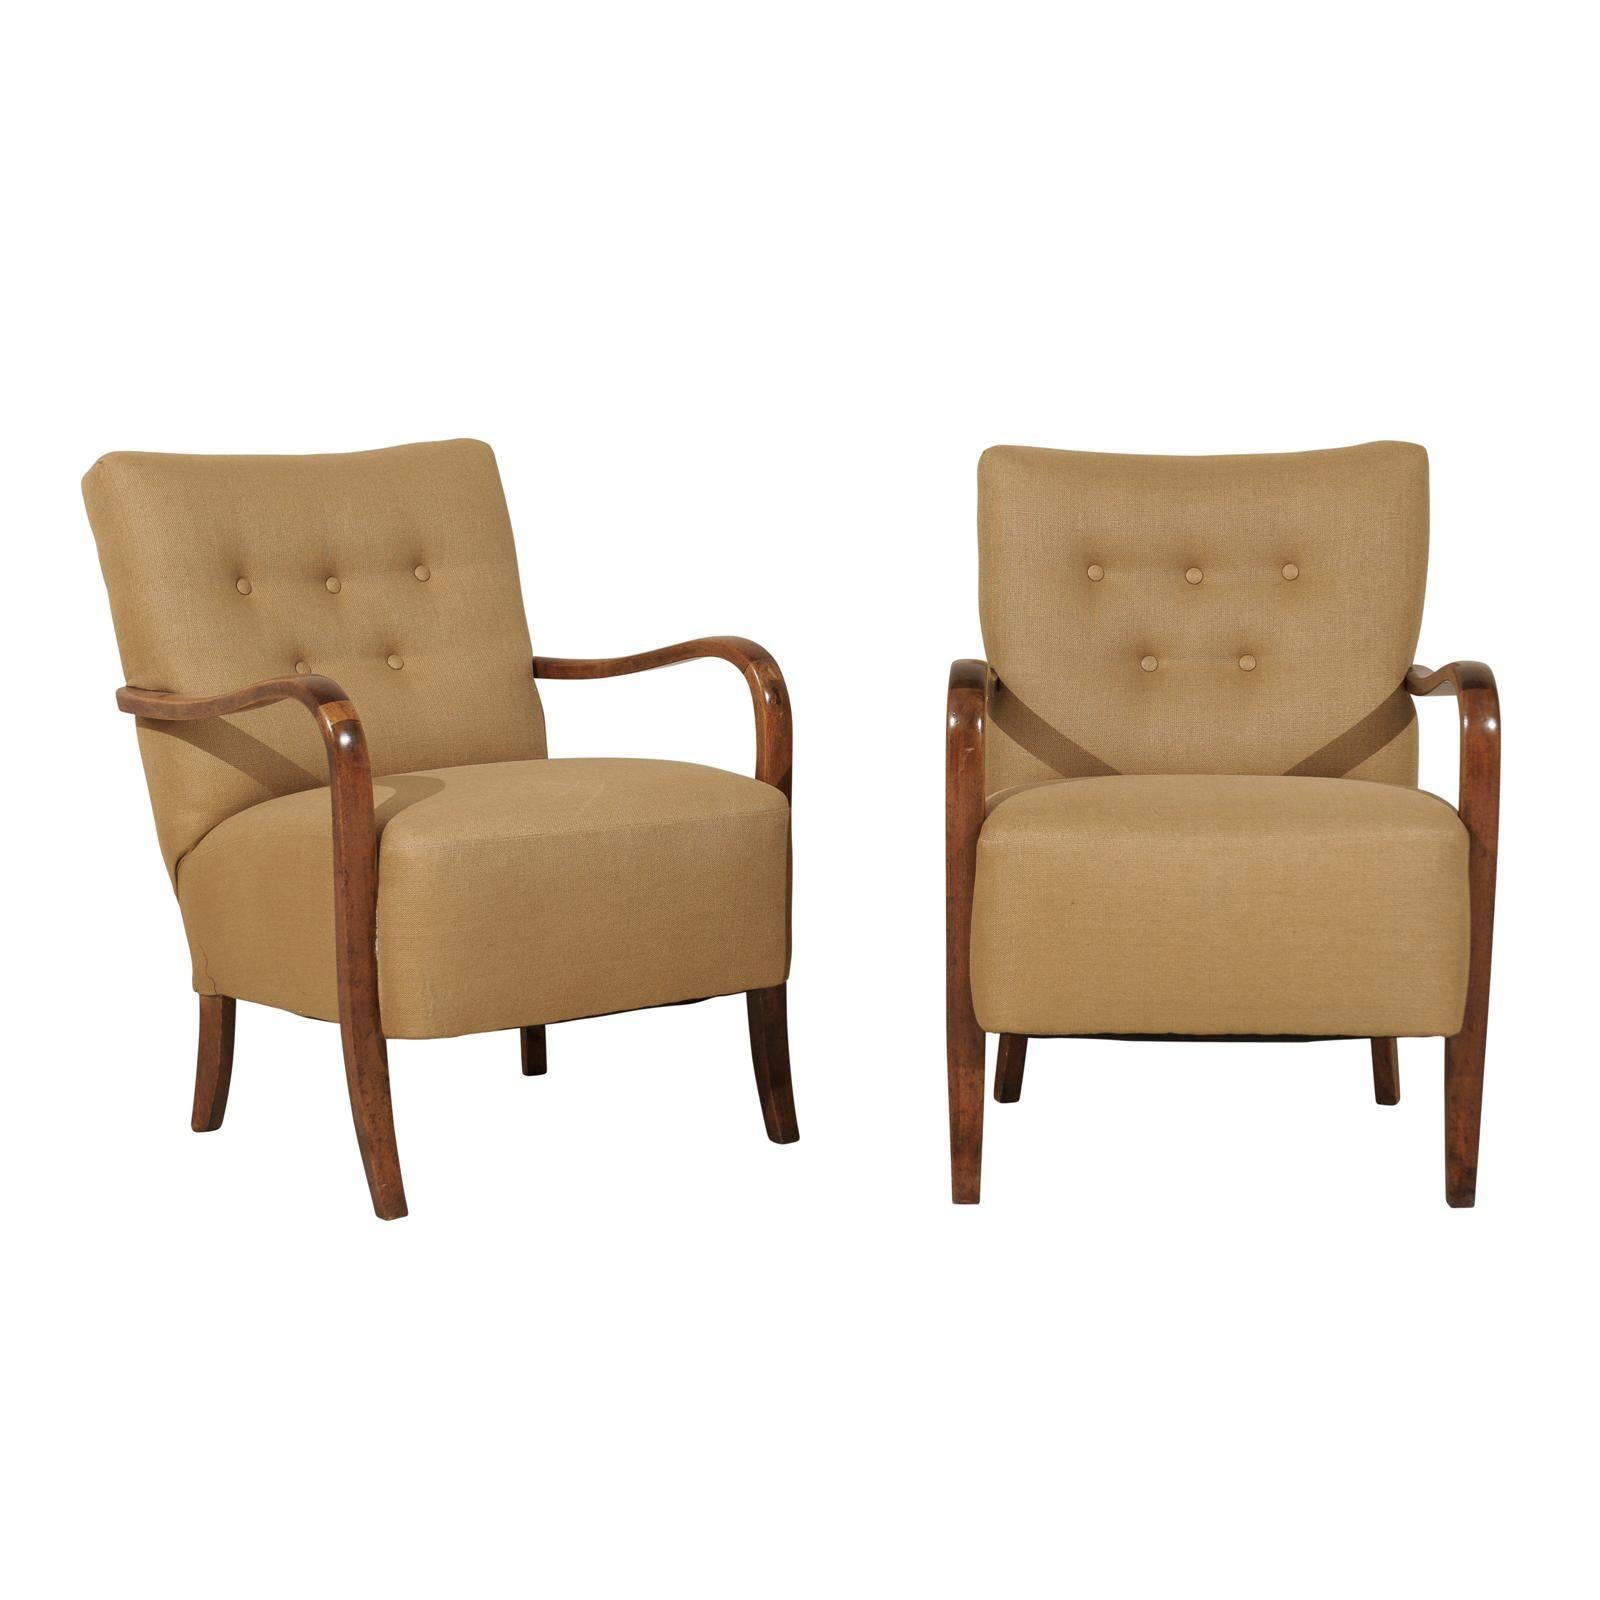 Pair of Swedish Art Deco Upholstered Armchairs